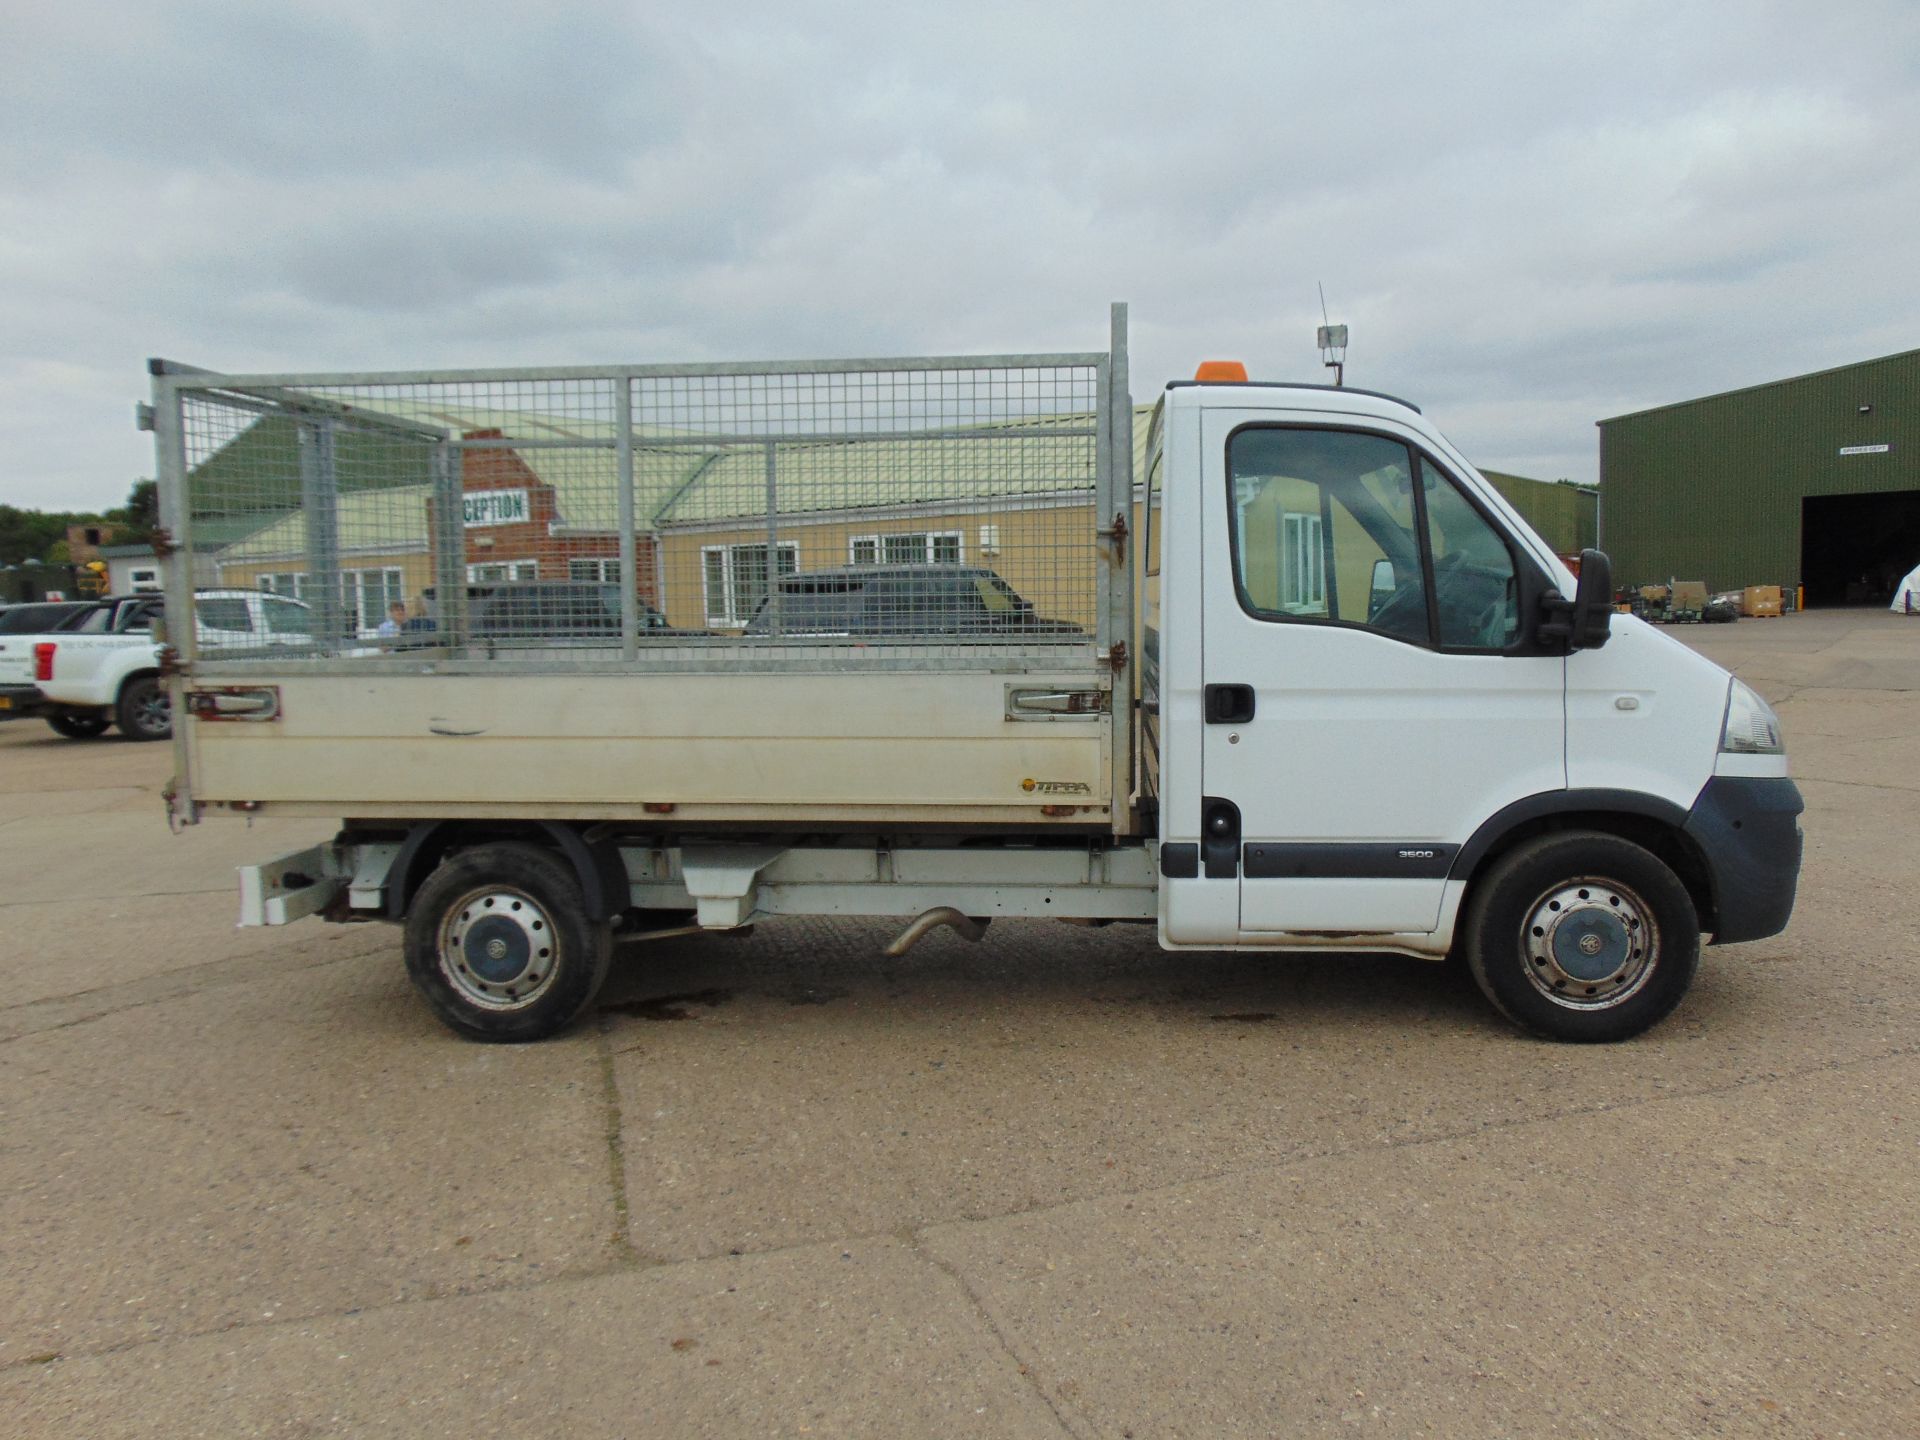 Vauxhall Movano 3500 2.5 CDTi MWB Flat Bed Tipper - Image 7 of 15